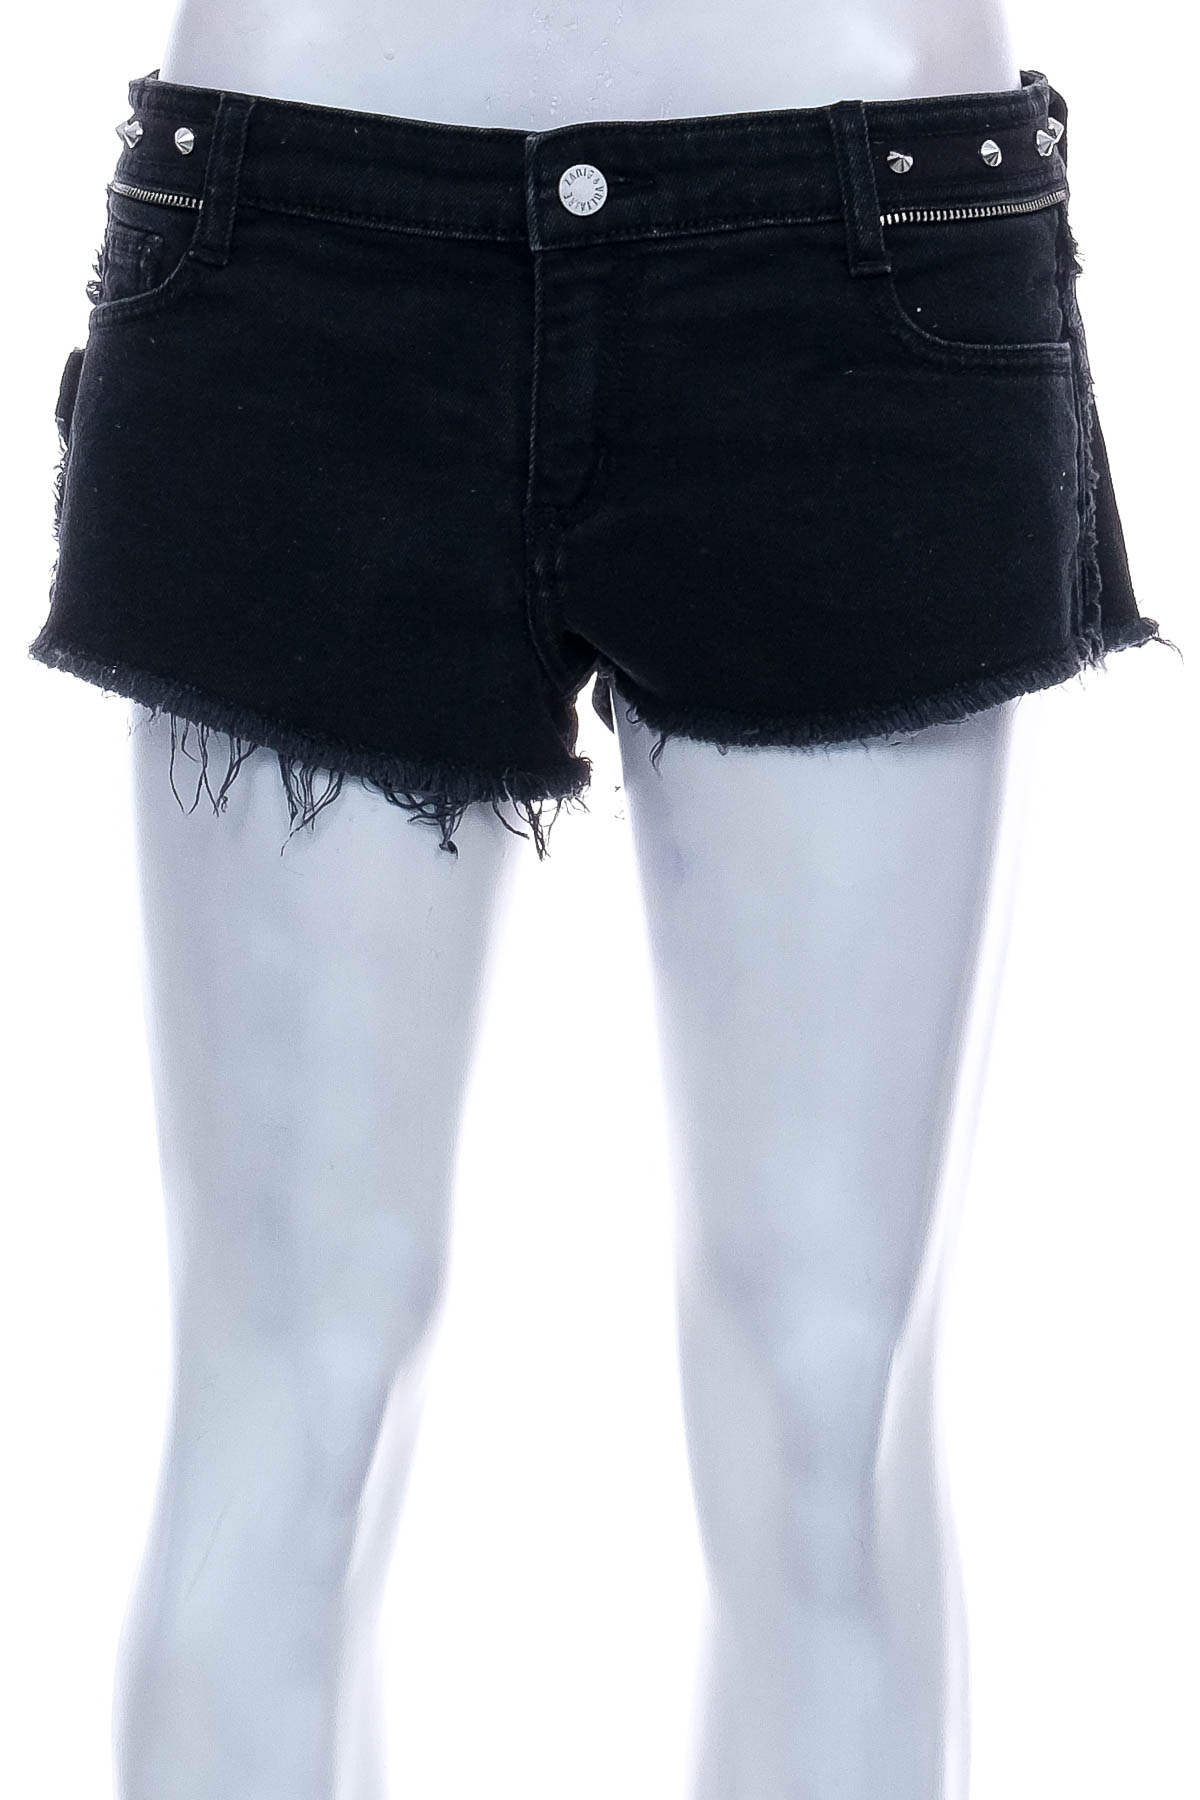 Female shorts - ZADIG & VOLTAIRE - 0